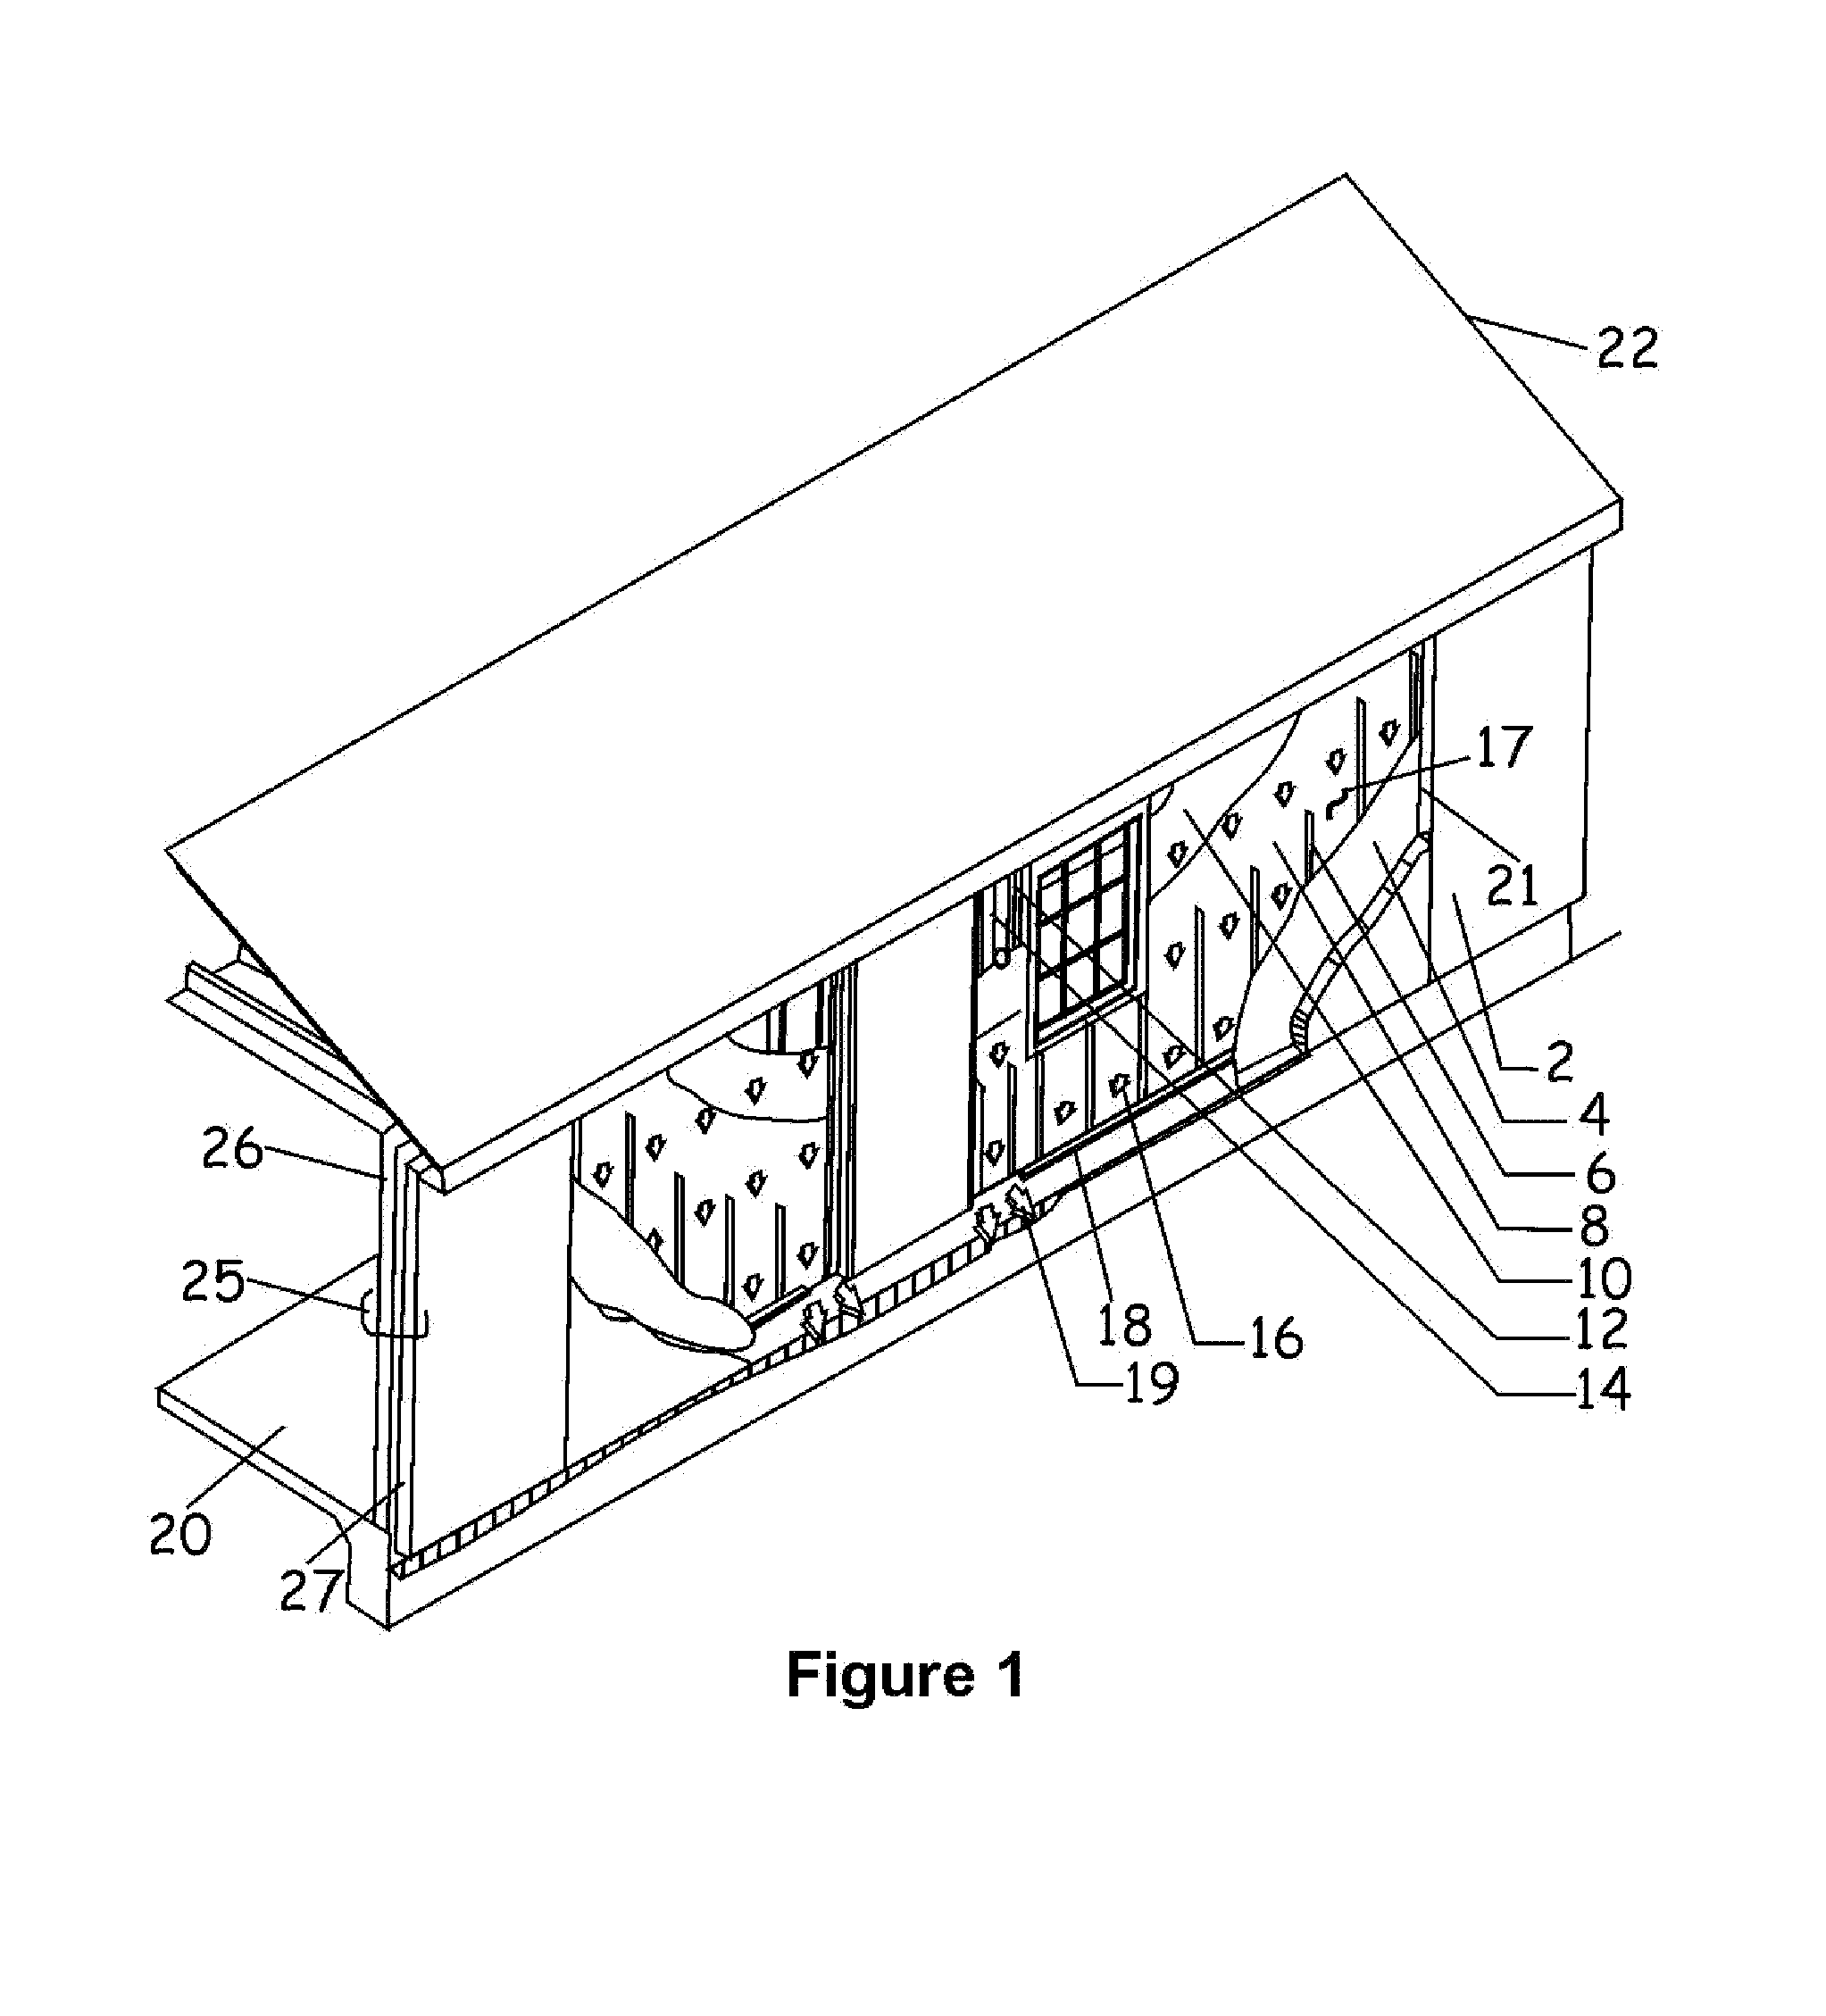 System and method for inhibiting moisture and mold in an outer wall of a structure